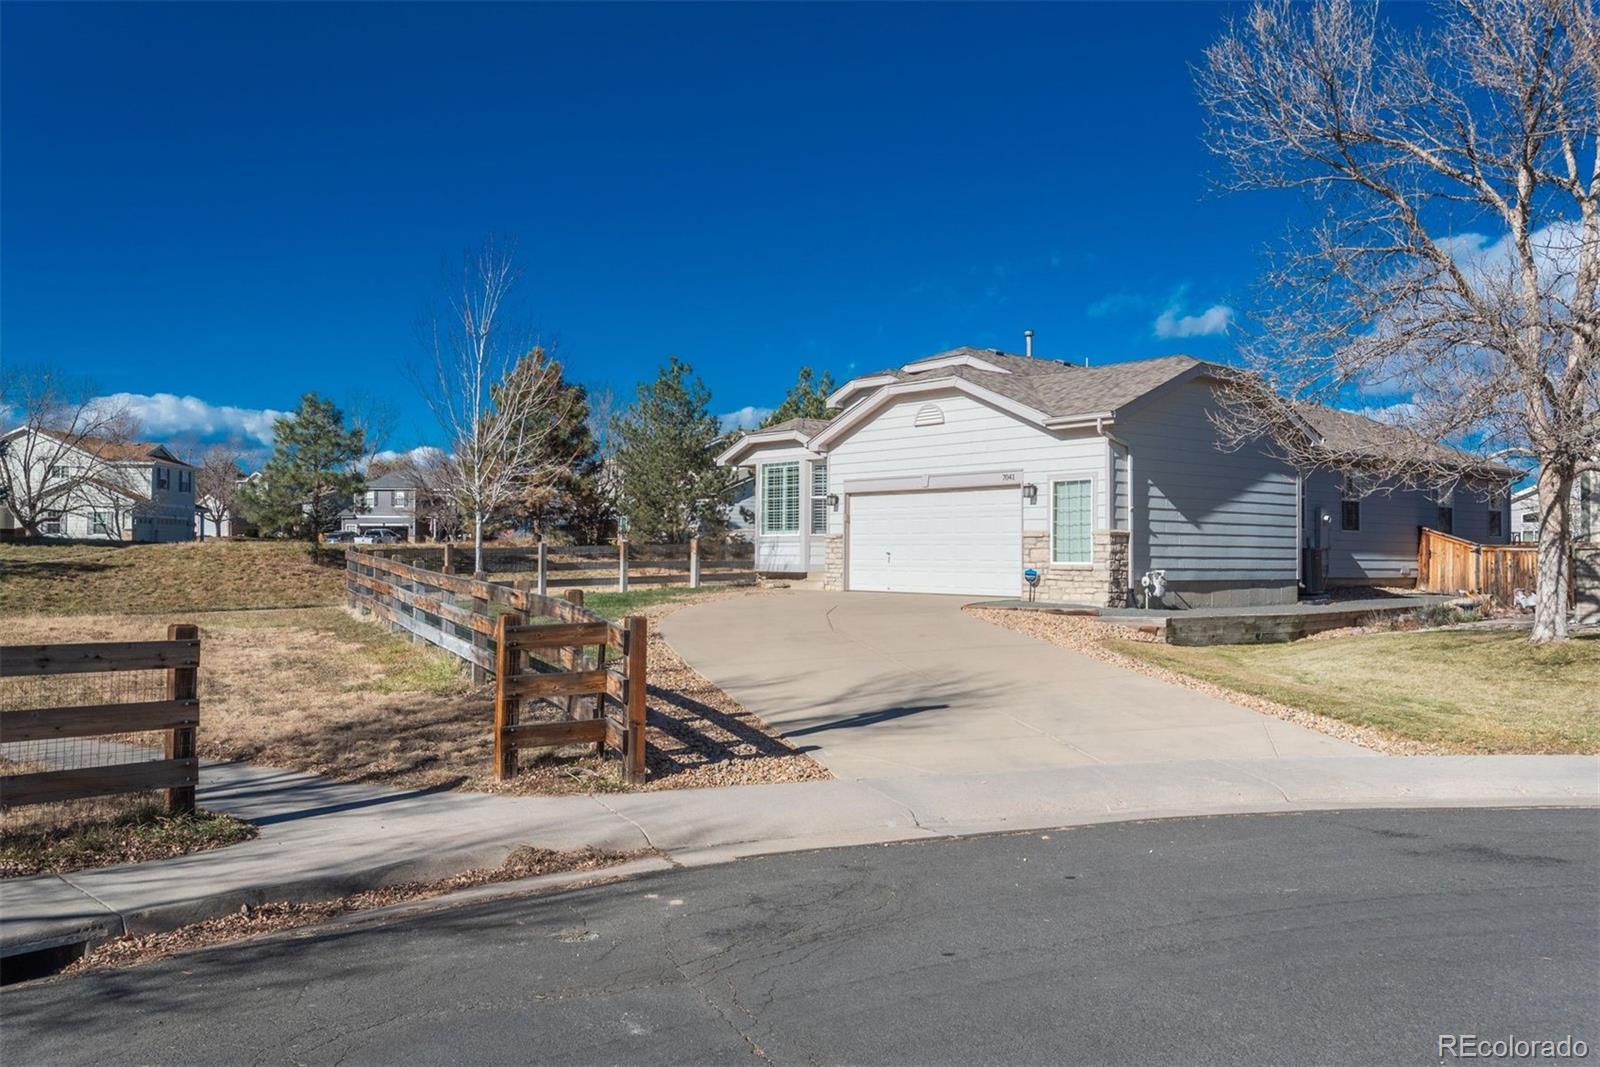 7041  leopard gate , Littleton sold home. Closed on 2024-01-23 for $702,000.